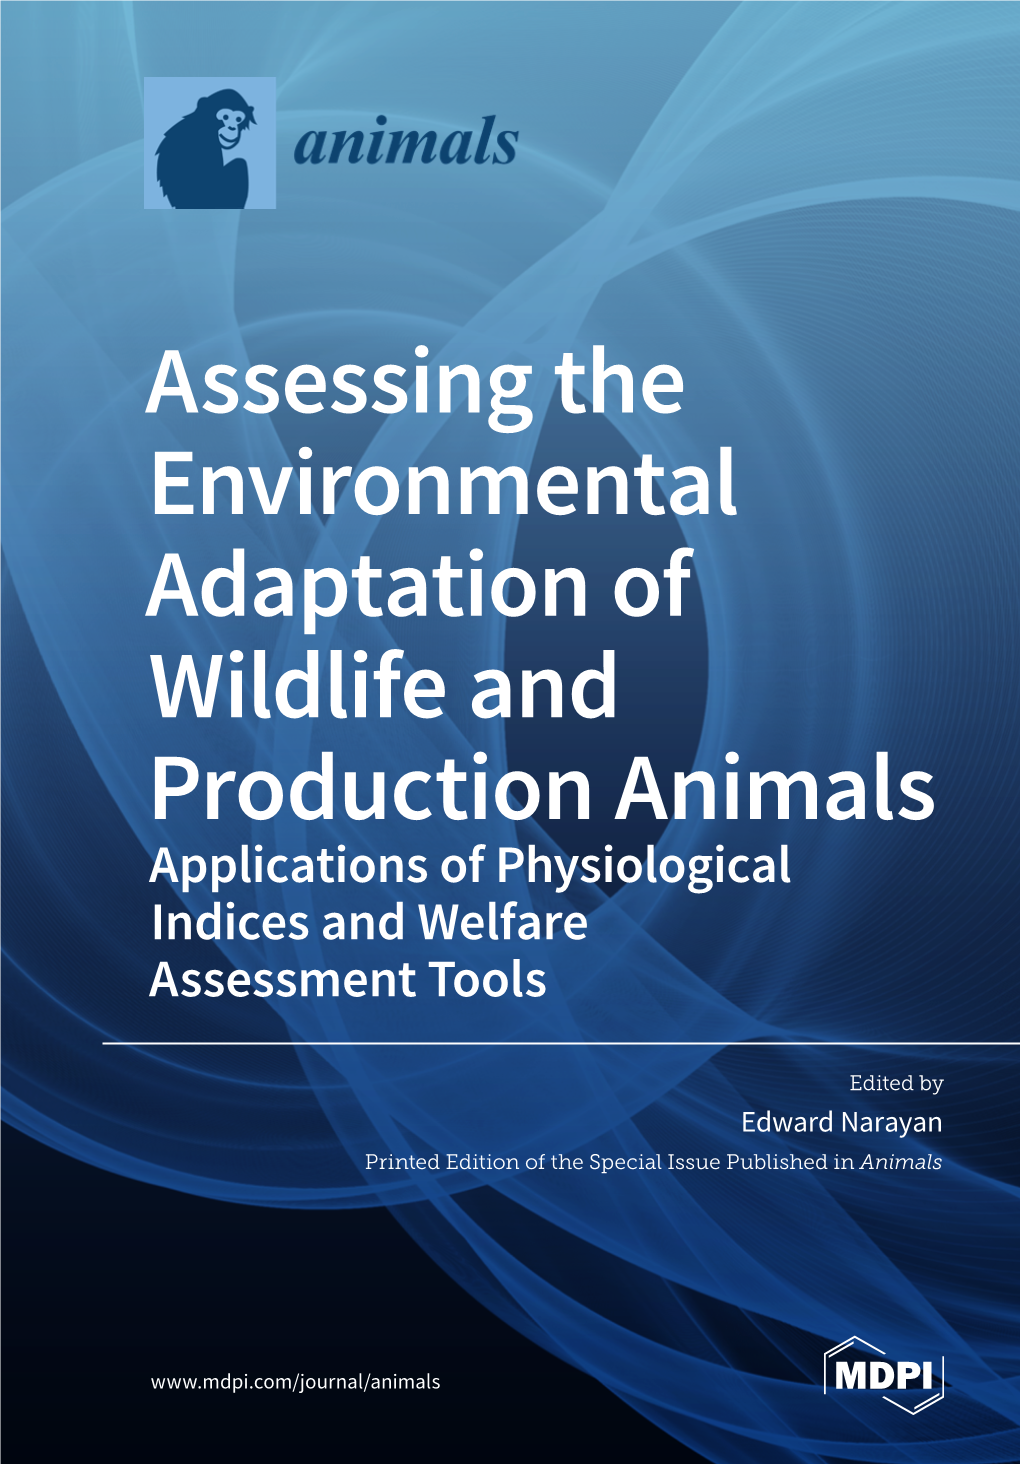 Assessing the Environmental Adaptation of Wildlife And